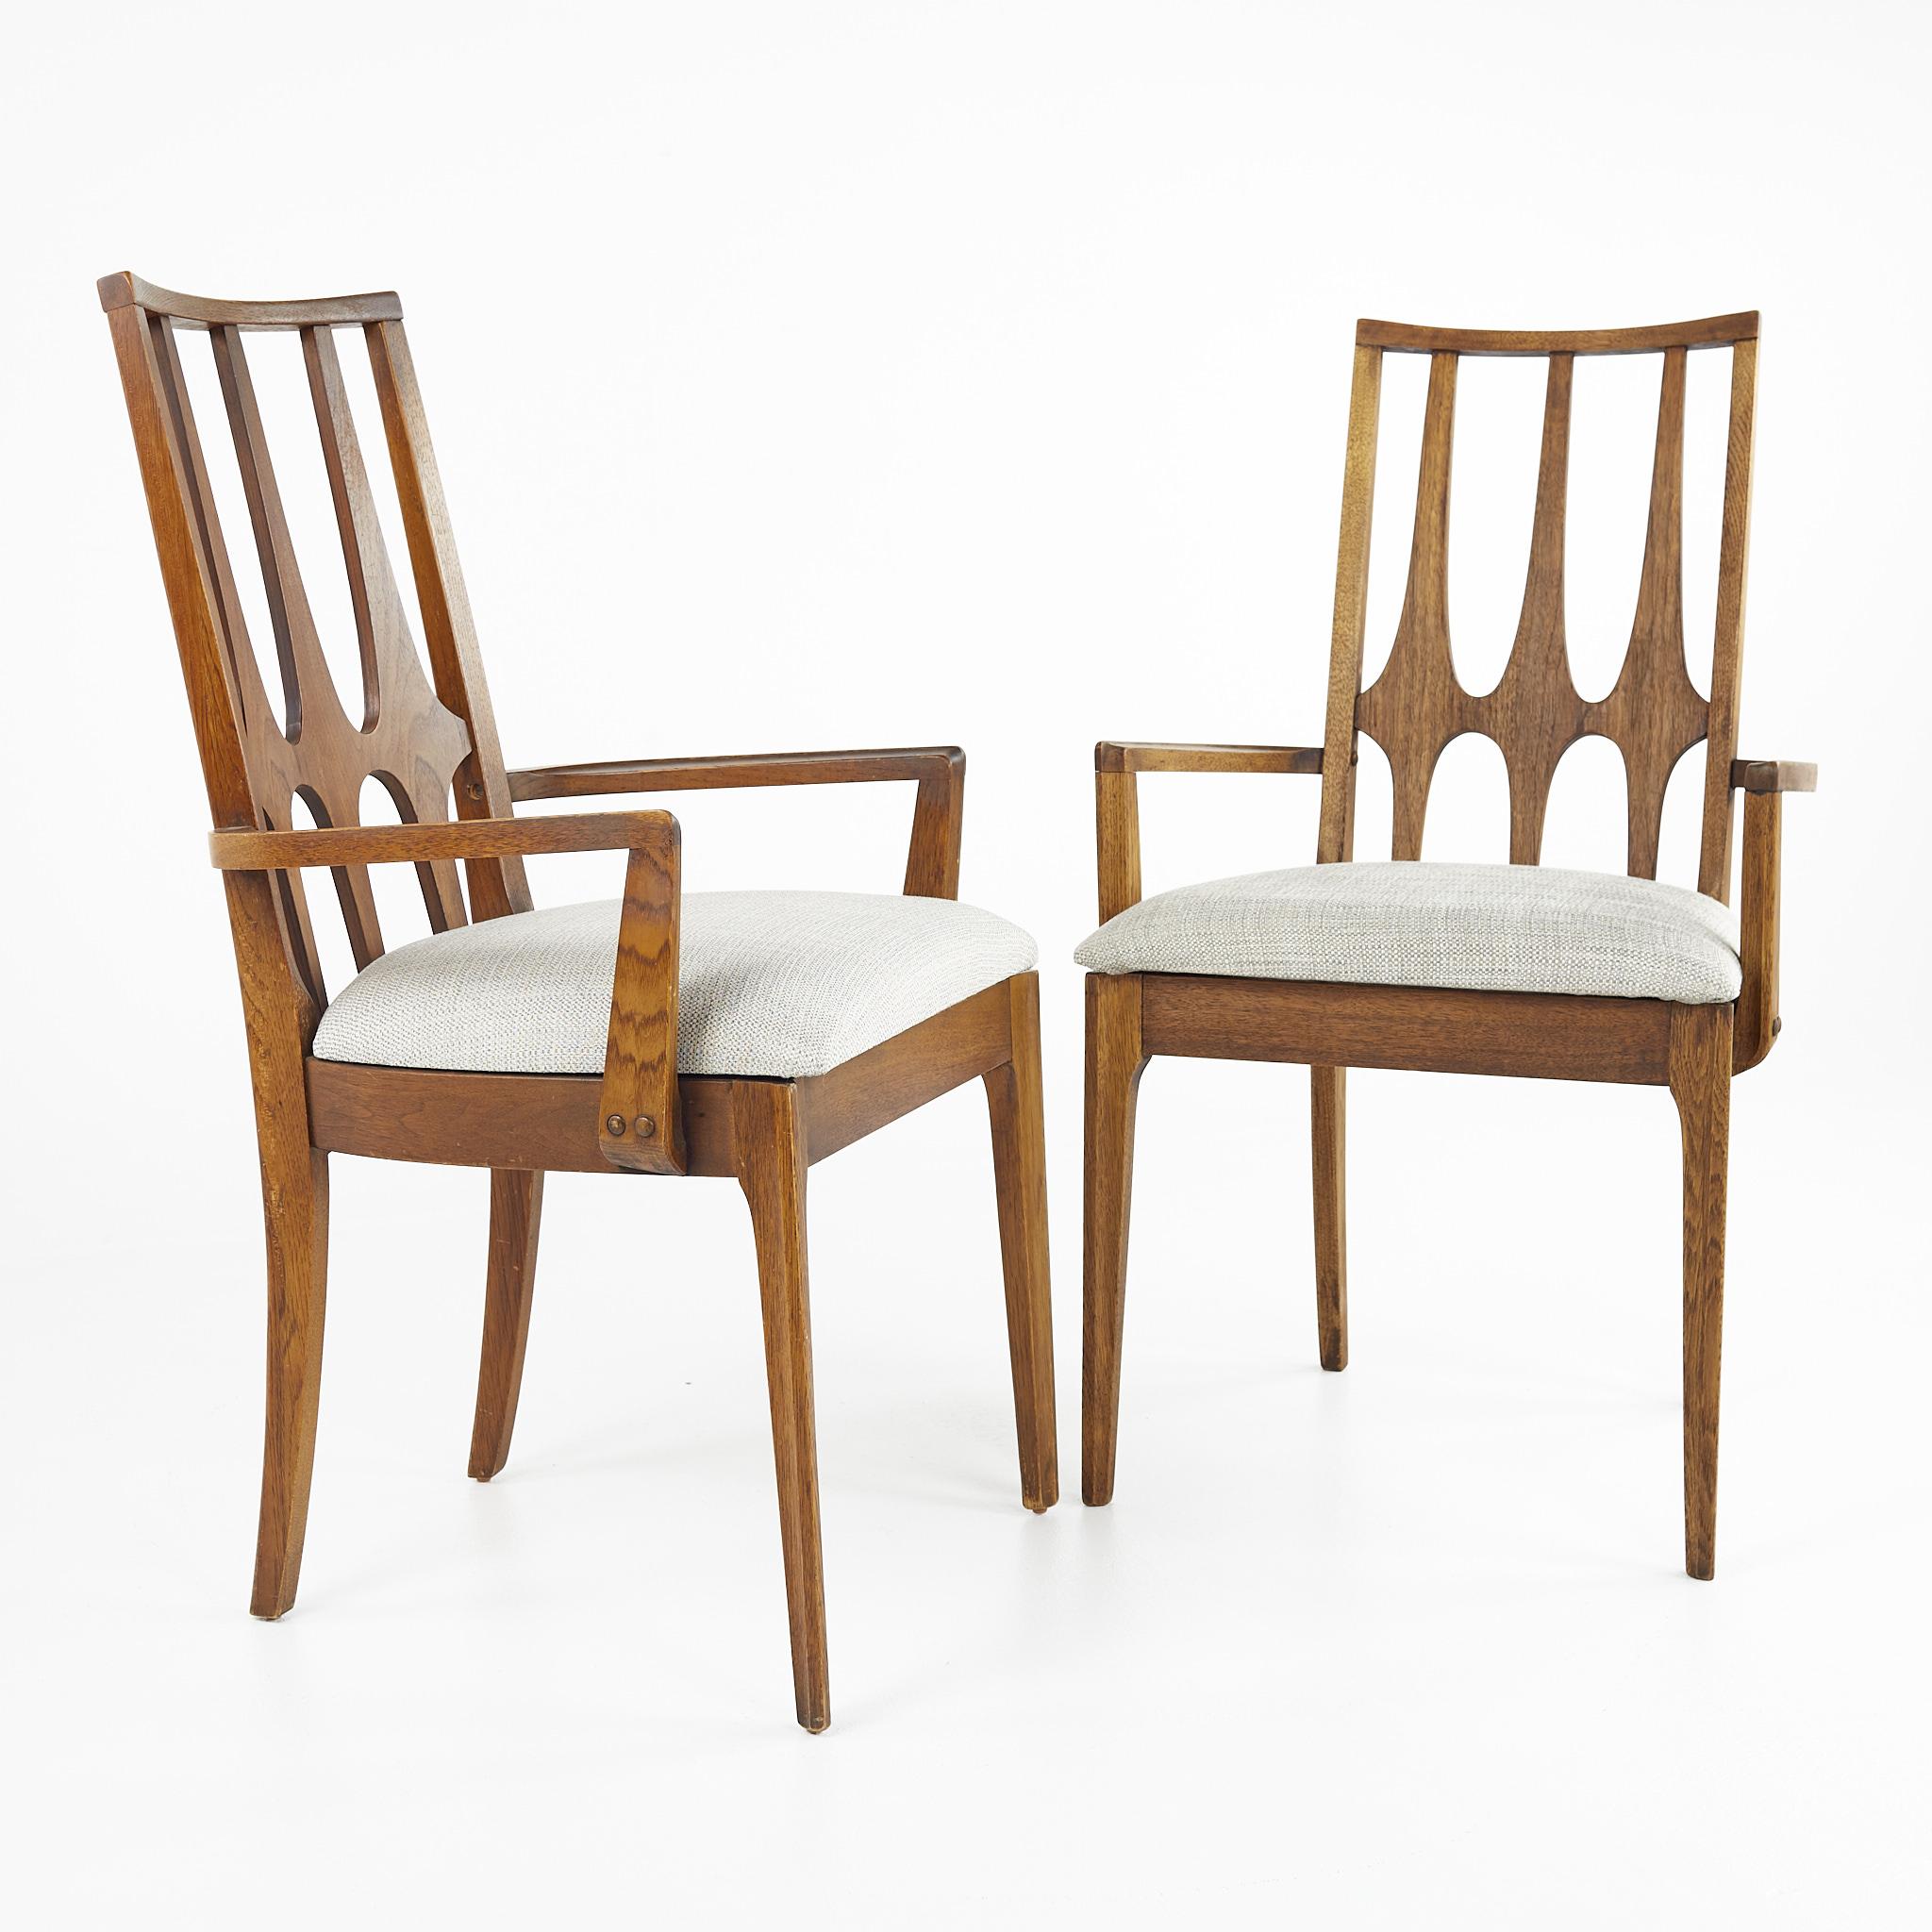 Broyhill Brasilia mid-century walnut captains chairs - a pair

These chairs measure: 21 wide x 21.5 deep x 38 inches high, with a seat height of 17.25 and arm height of 23.75 inches

All pieces of furniture can be had in what we call restored